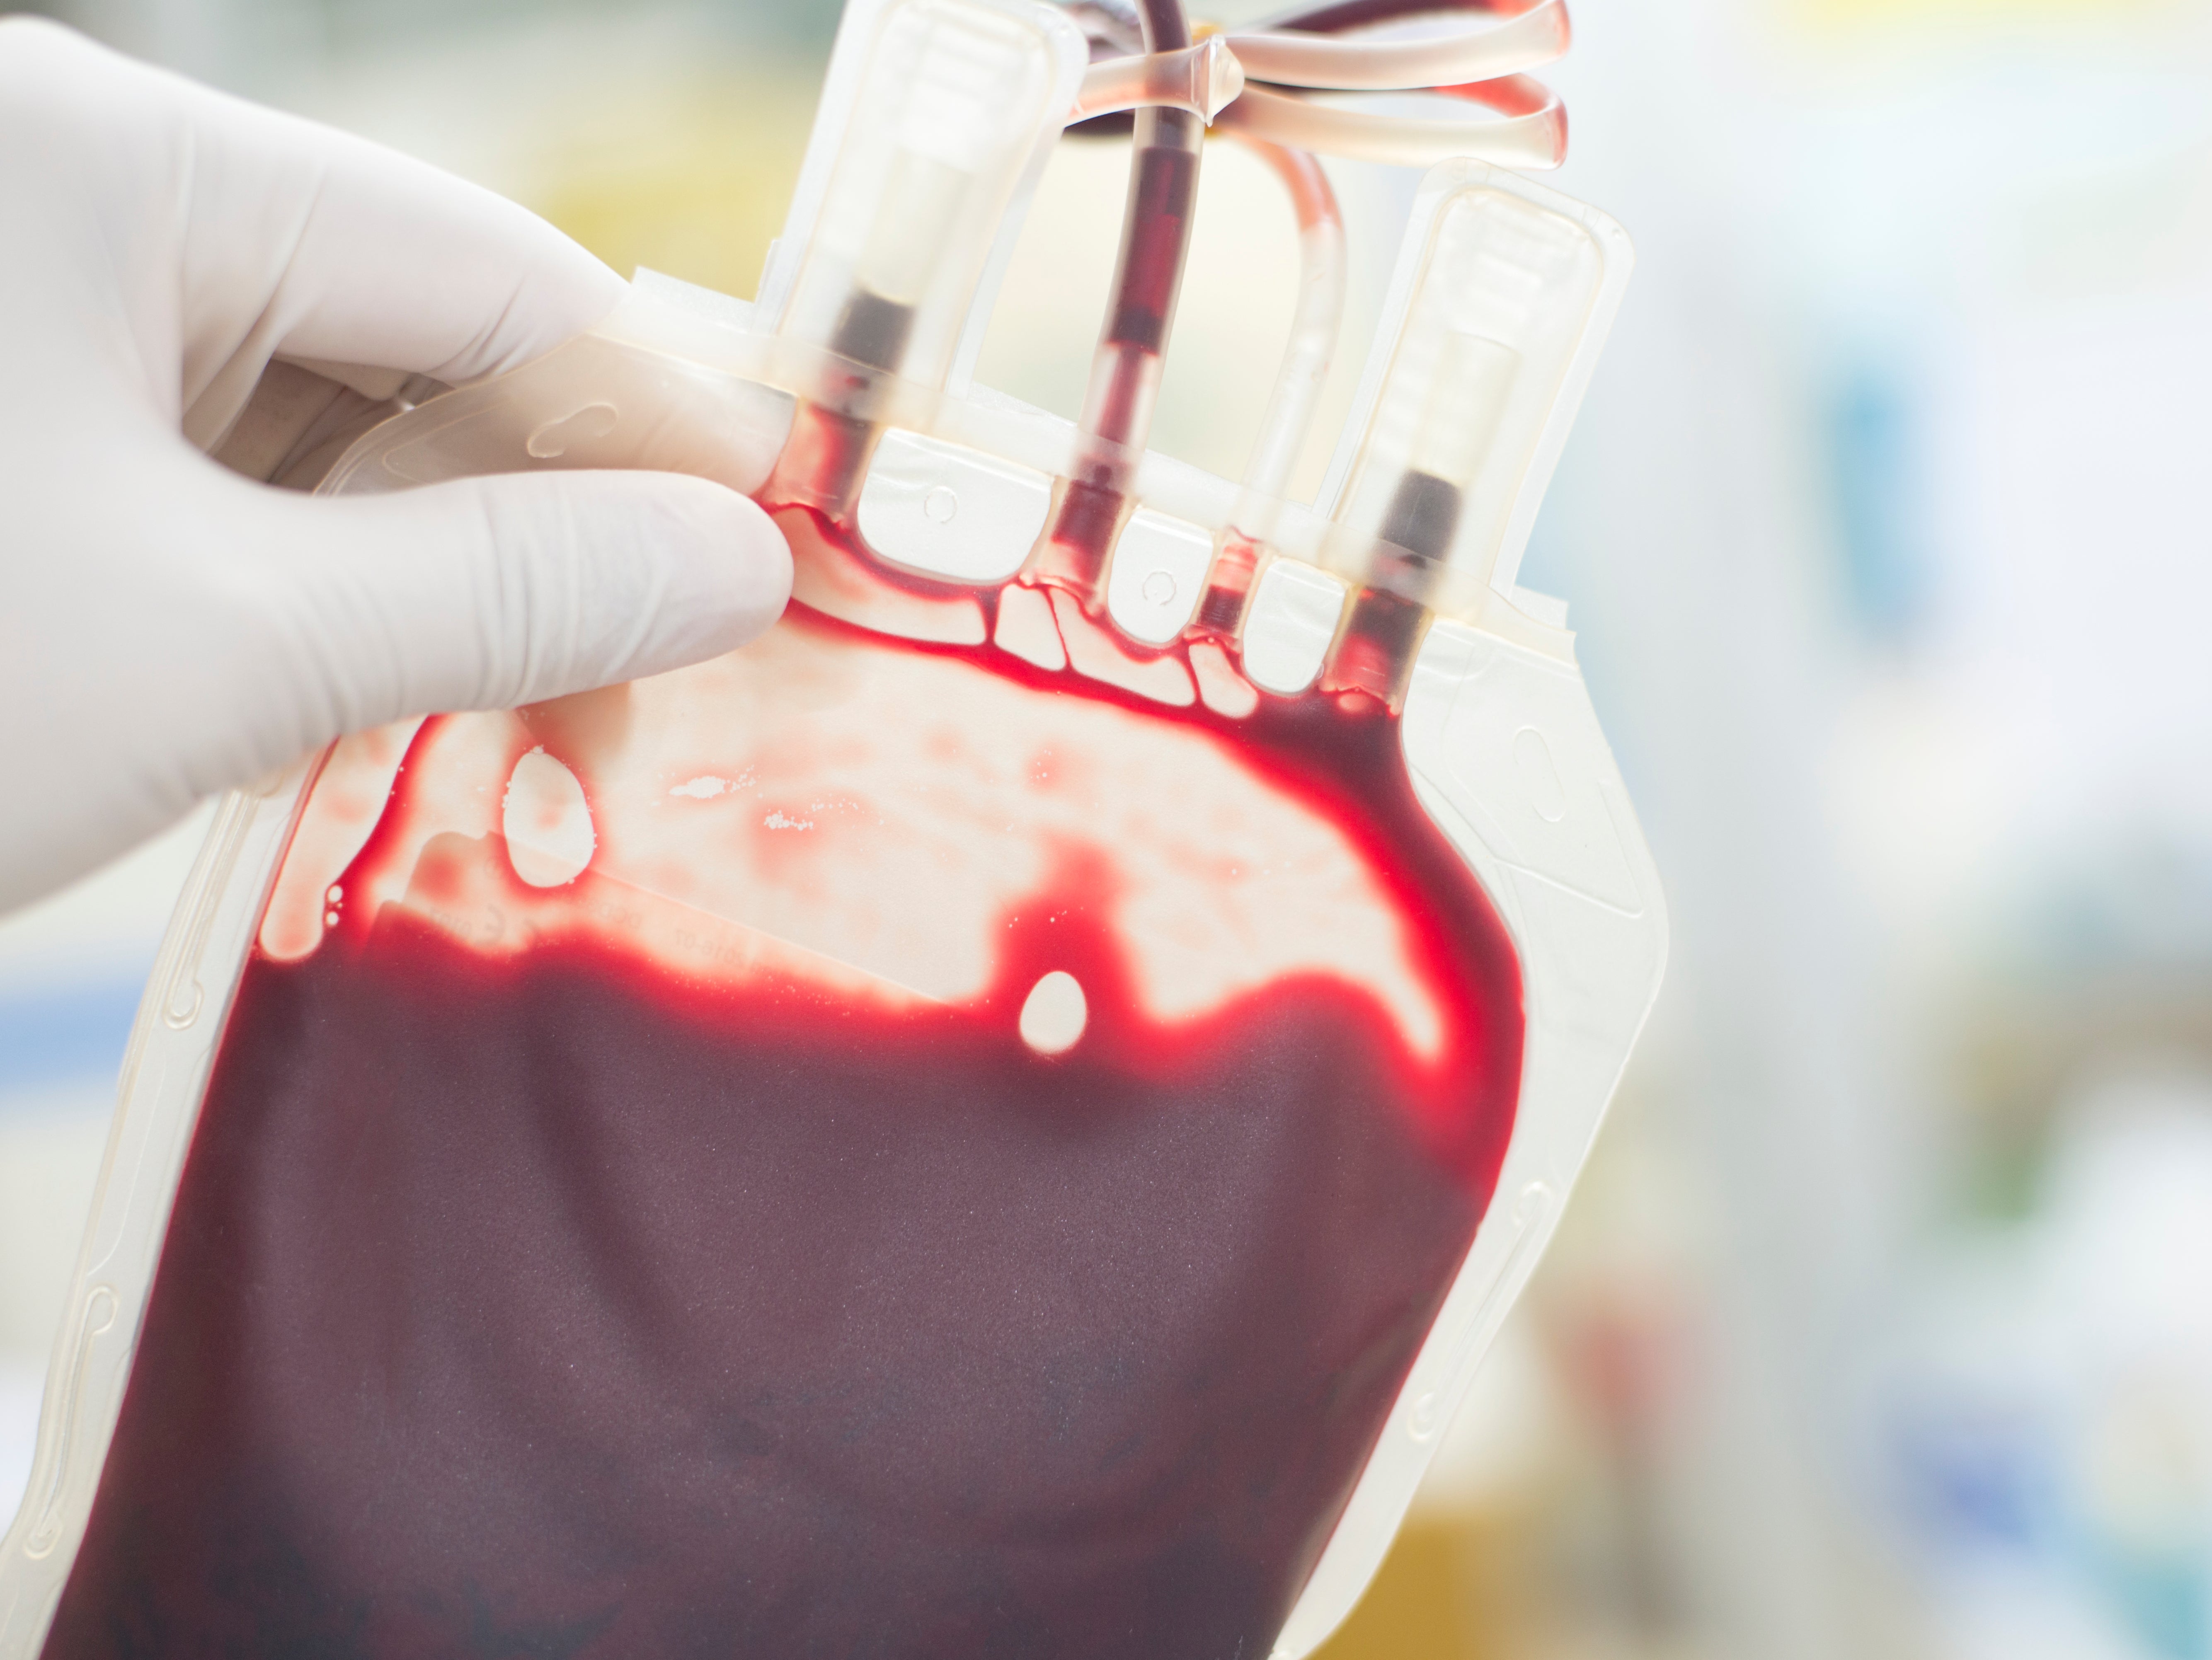 Thousands were infected with contaminated blood in the NHS treatment scandal